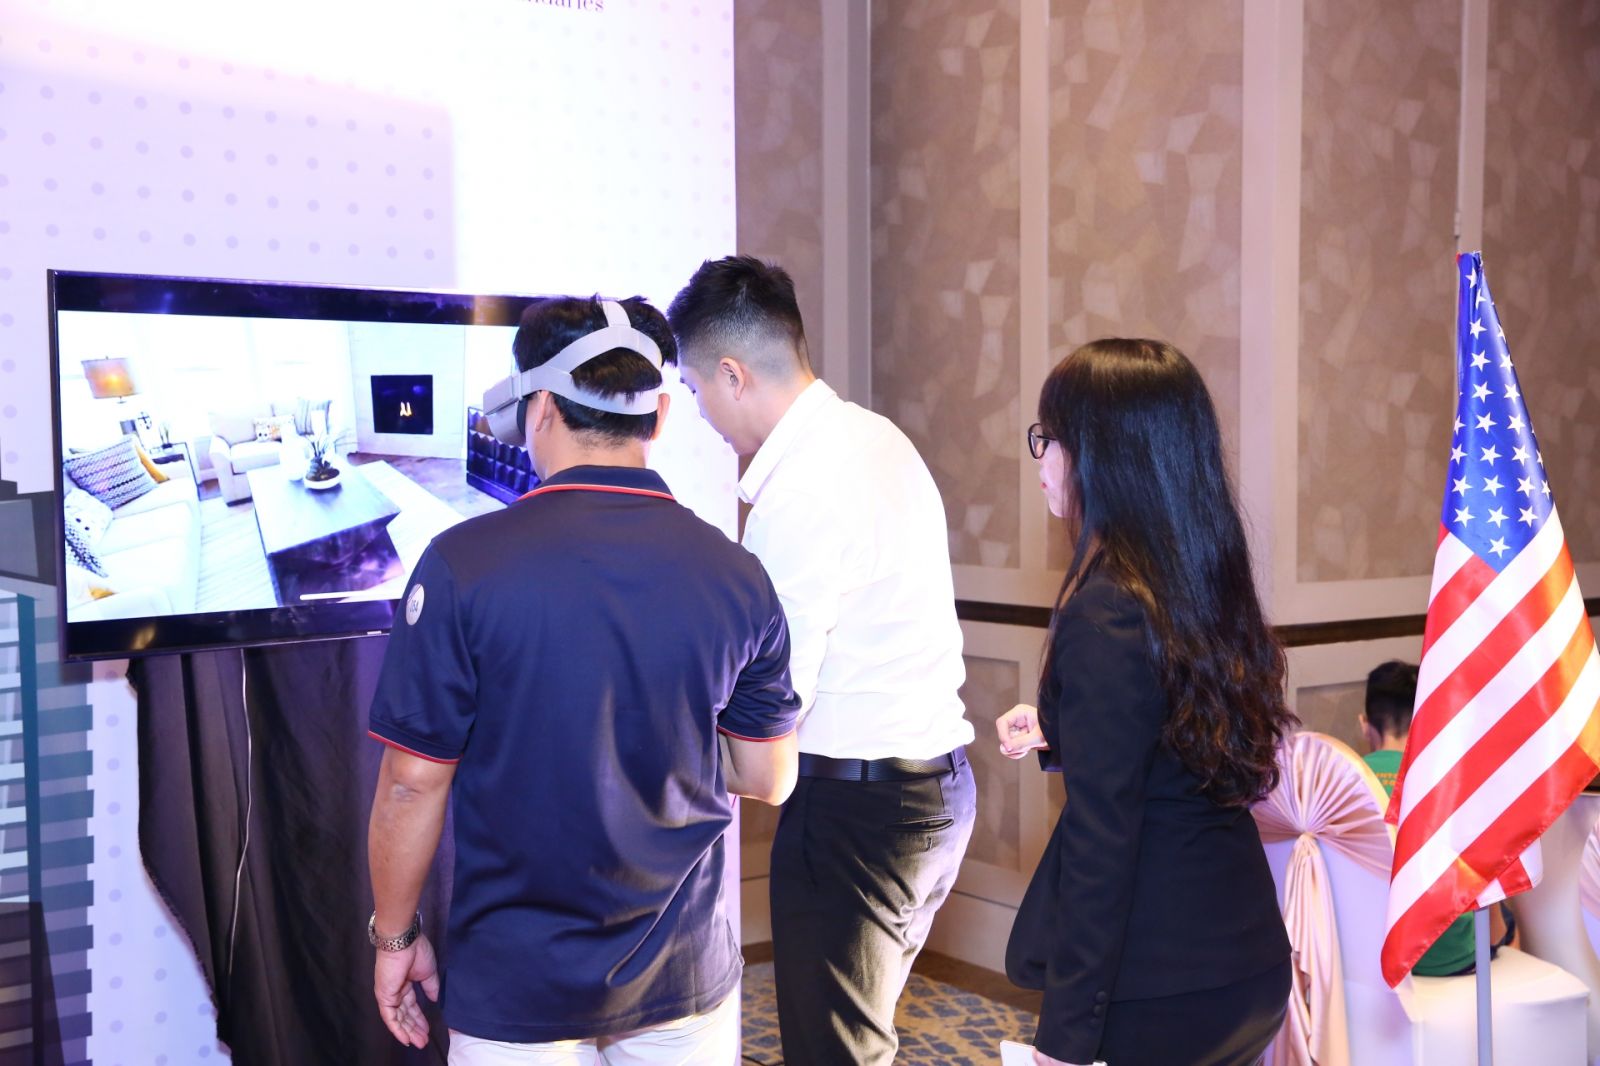 Customers on a virtual reality tour to properties in the US.